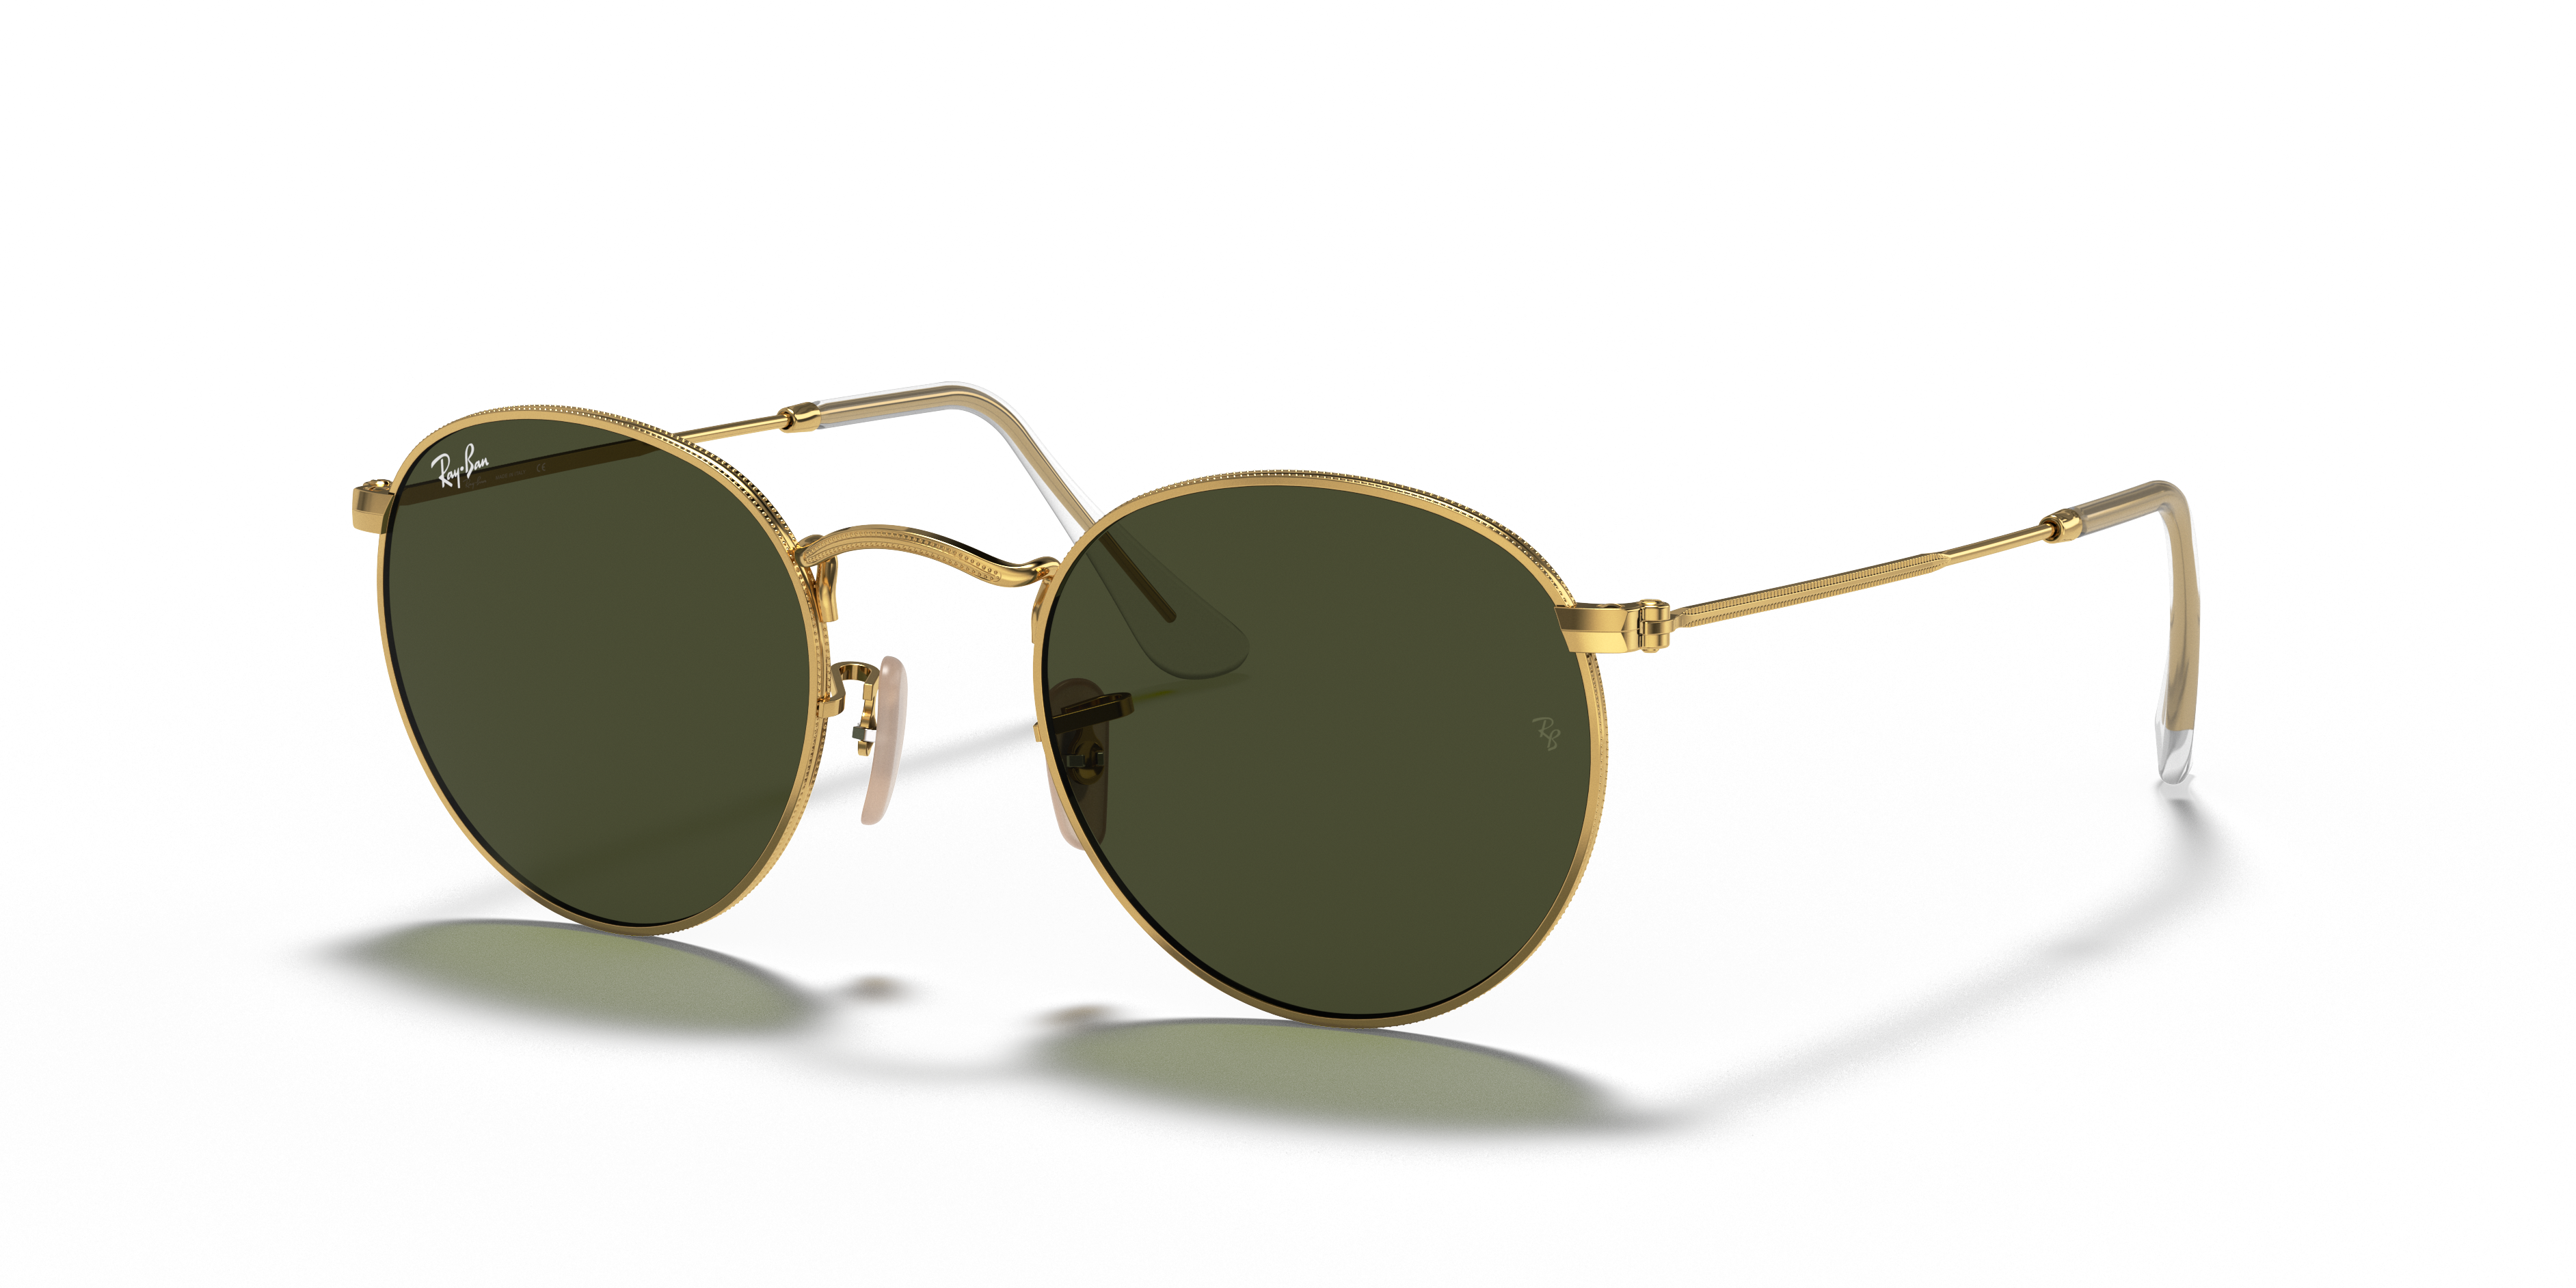 Ray Ban Ronde zonnebril groen-goud casual uitstraling Accessoires Zonnebrillen Ronde zonnebrillen 